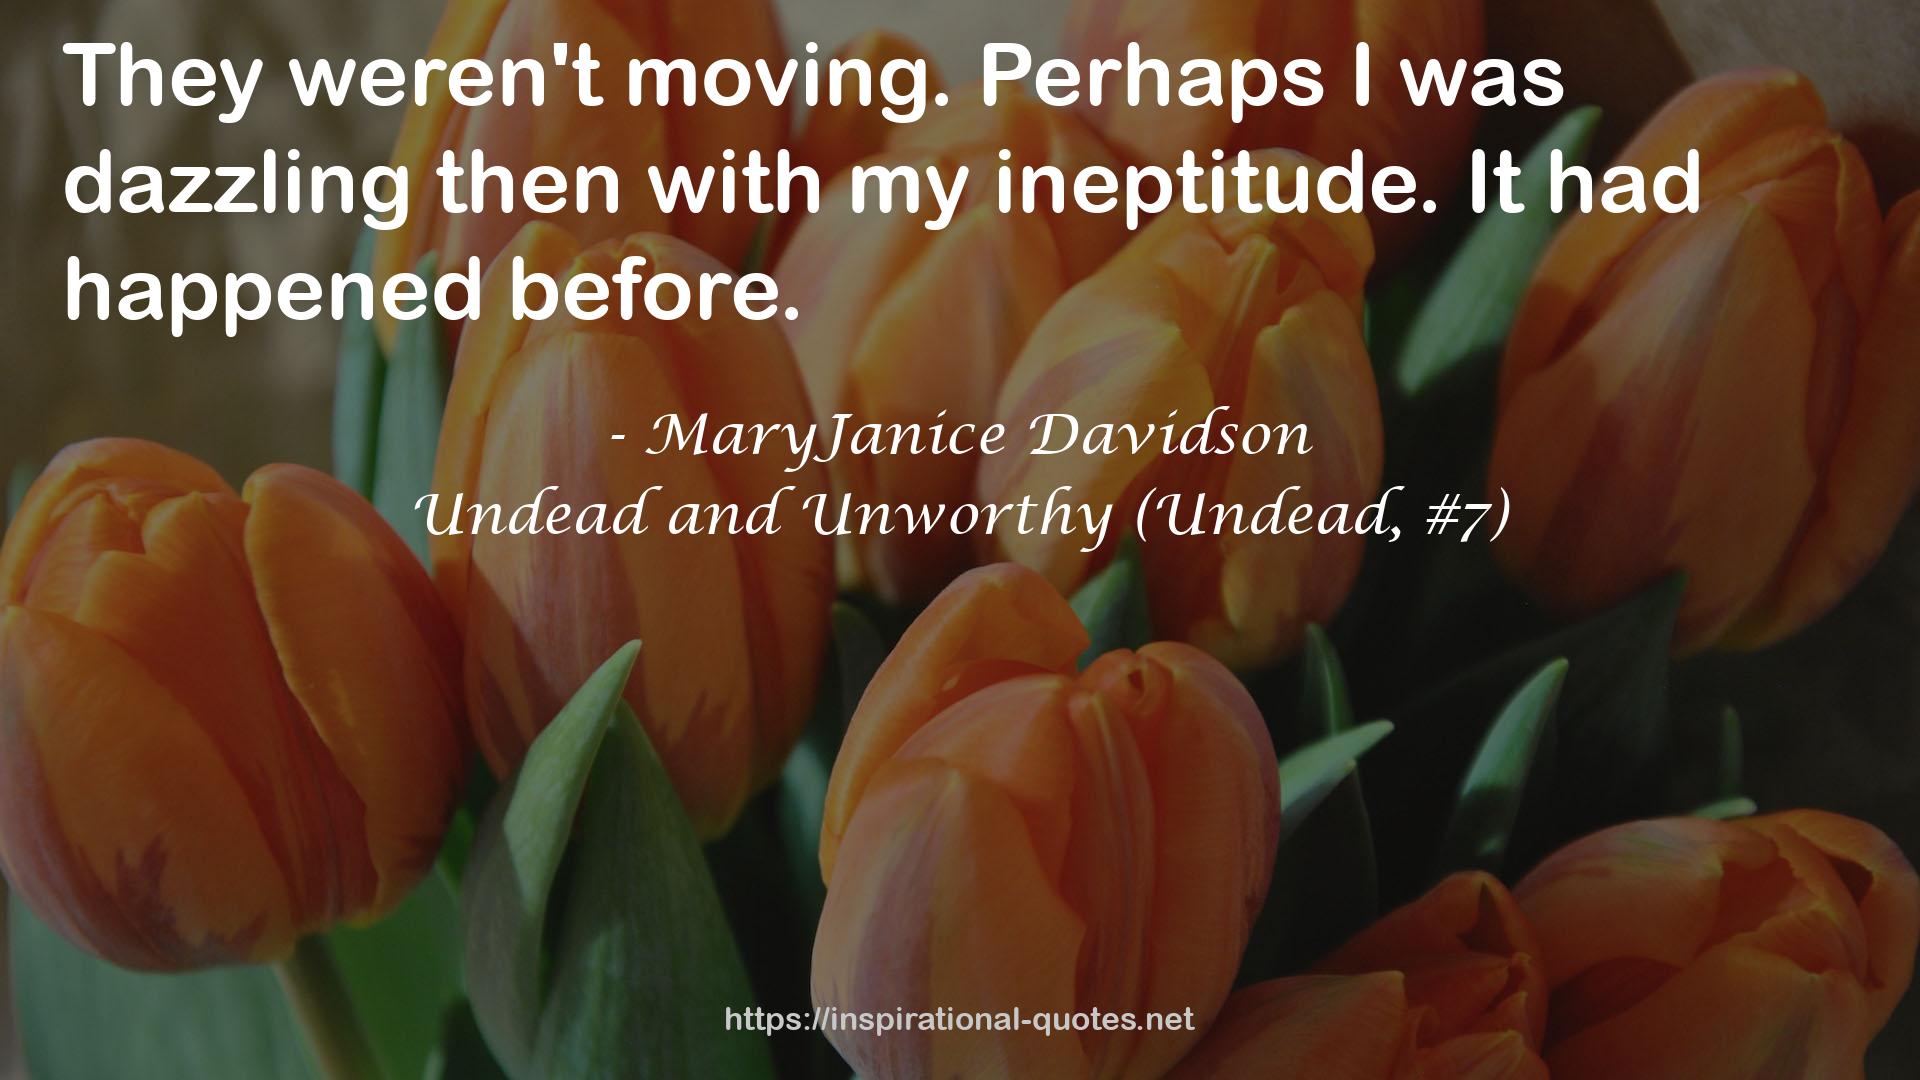 Undead and Unworthy (Undead, #7) QUOTES